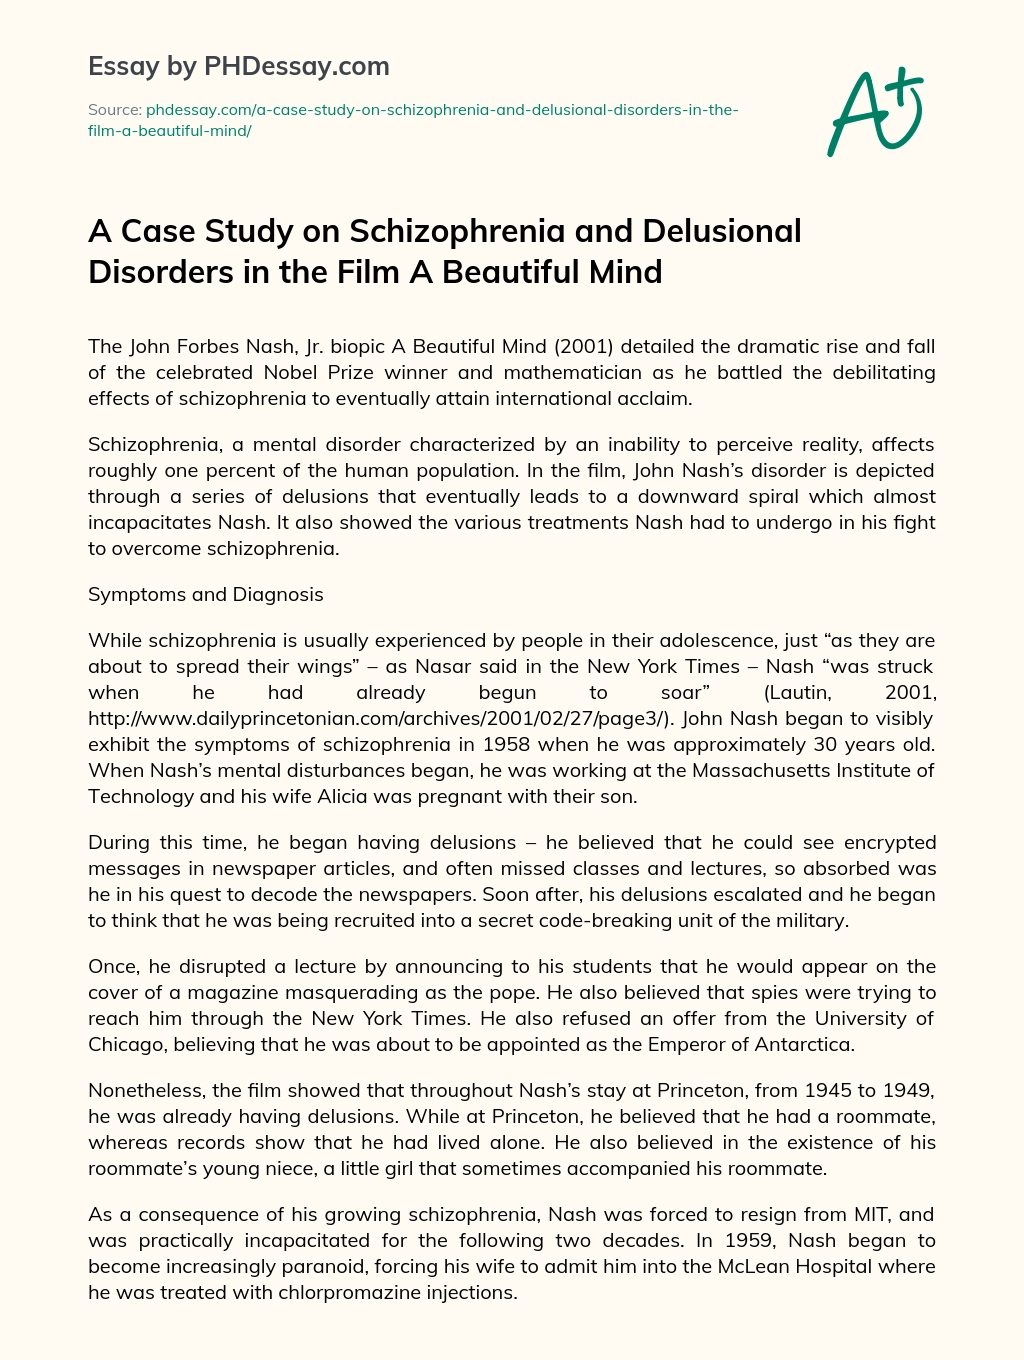 A Case Study on Schizophrenia and Delusional Disorders in the Film A Beautiful Mind essay